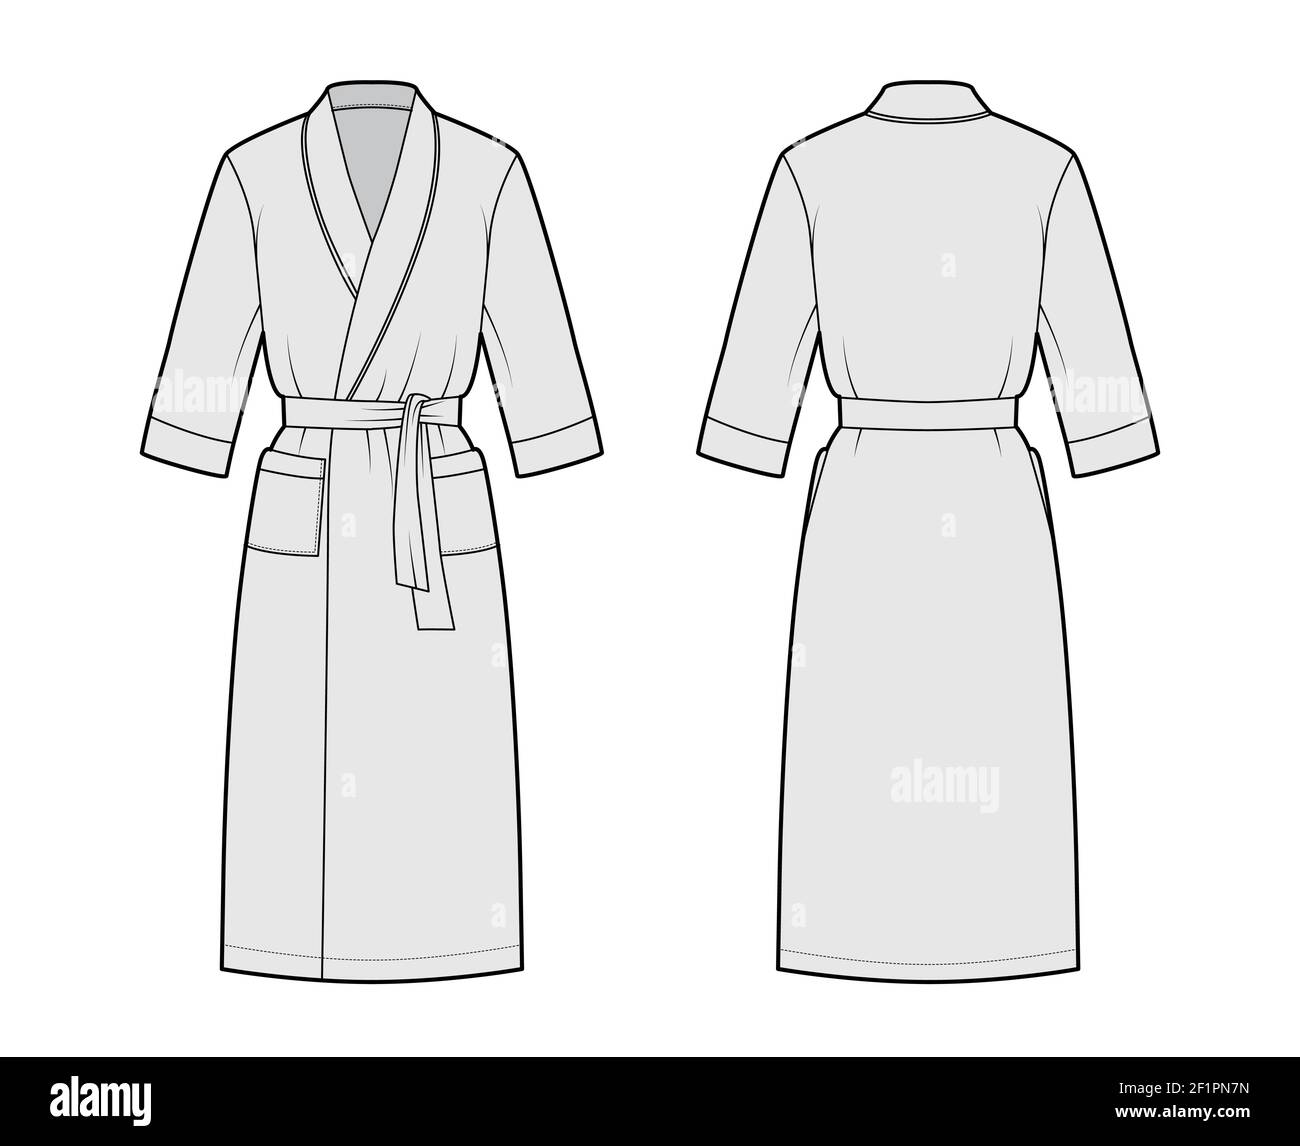 Bathrobe Dressing gown technical fashion illustration with wrap opening,  knee length, oversized, tie, pocket, elbow sleeves. Flat apparel front  back, grey color style. Women, men, unisex CAD mockup Stock Vector Image &